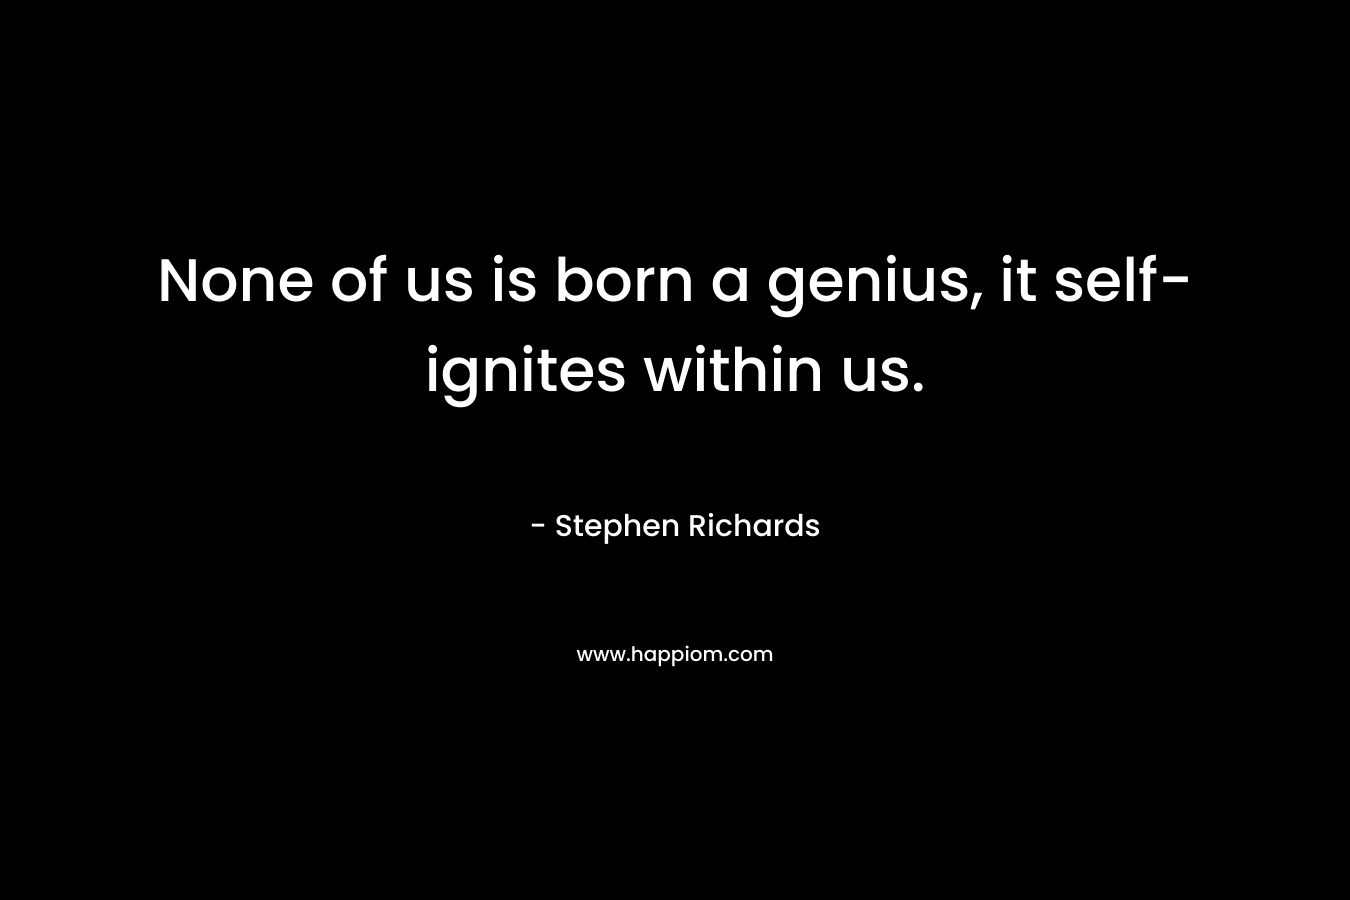 None of us is born a genius, it self-ignites within us.